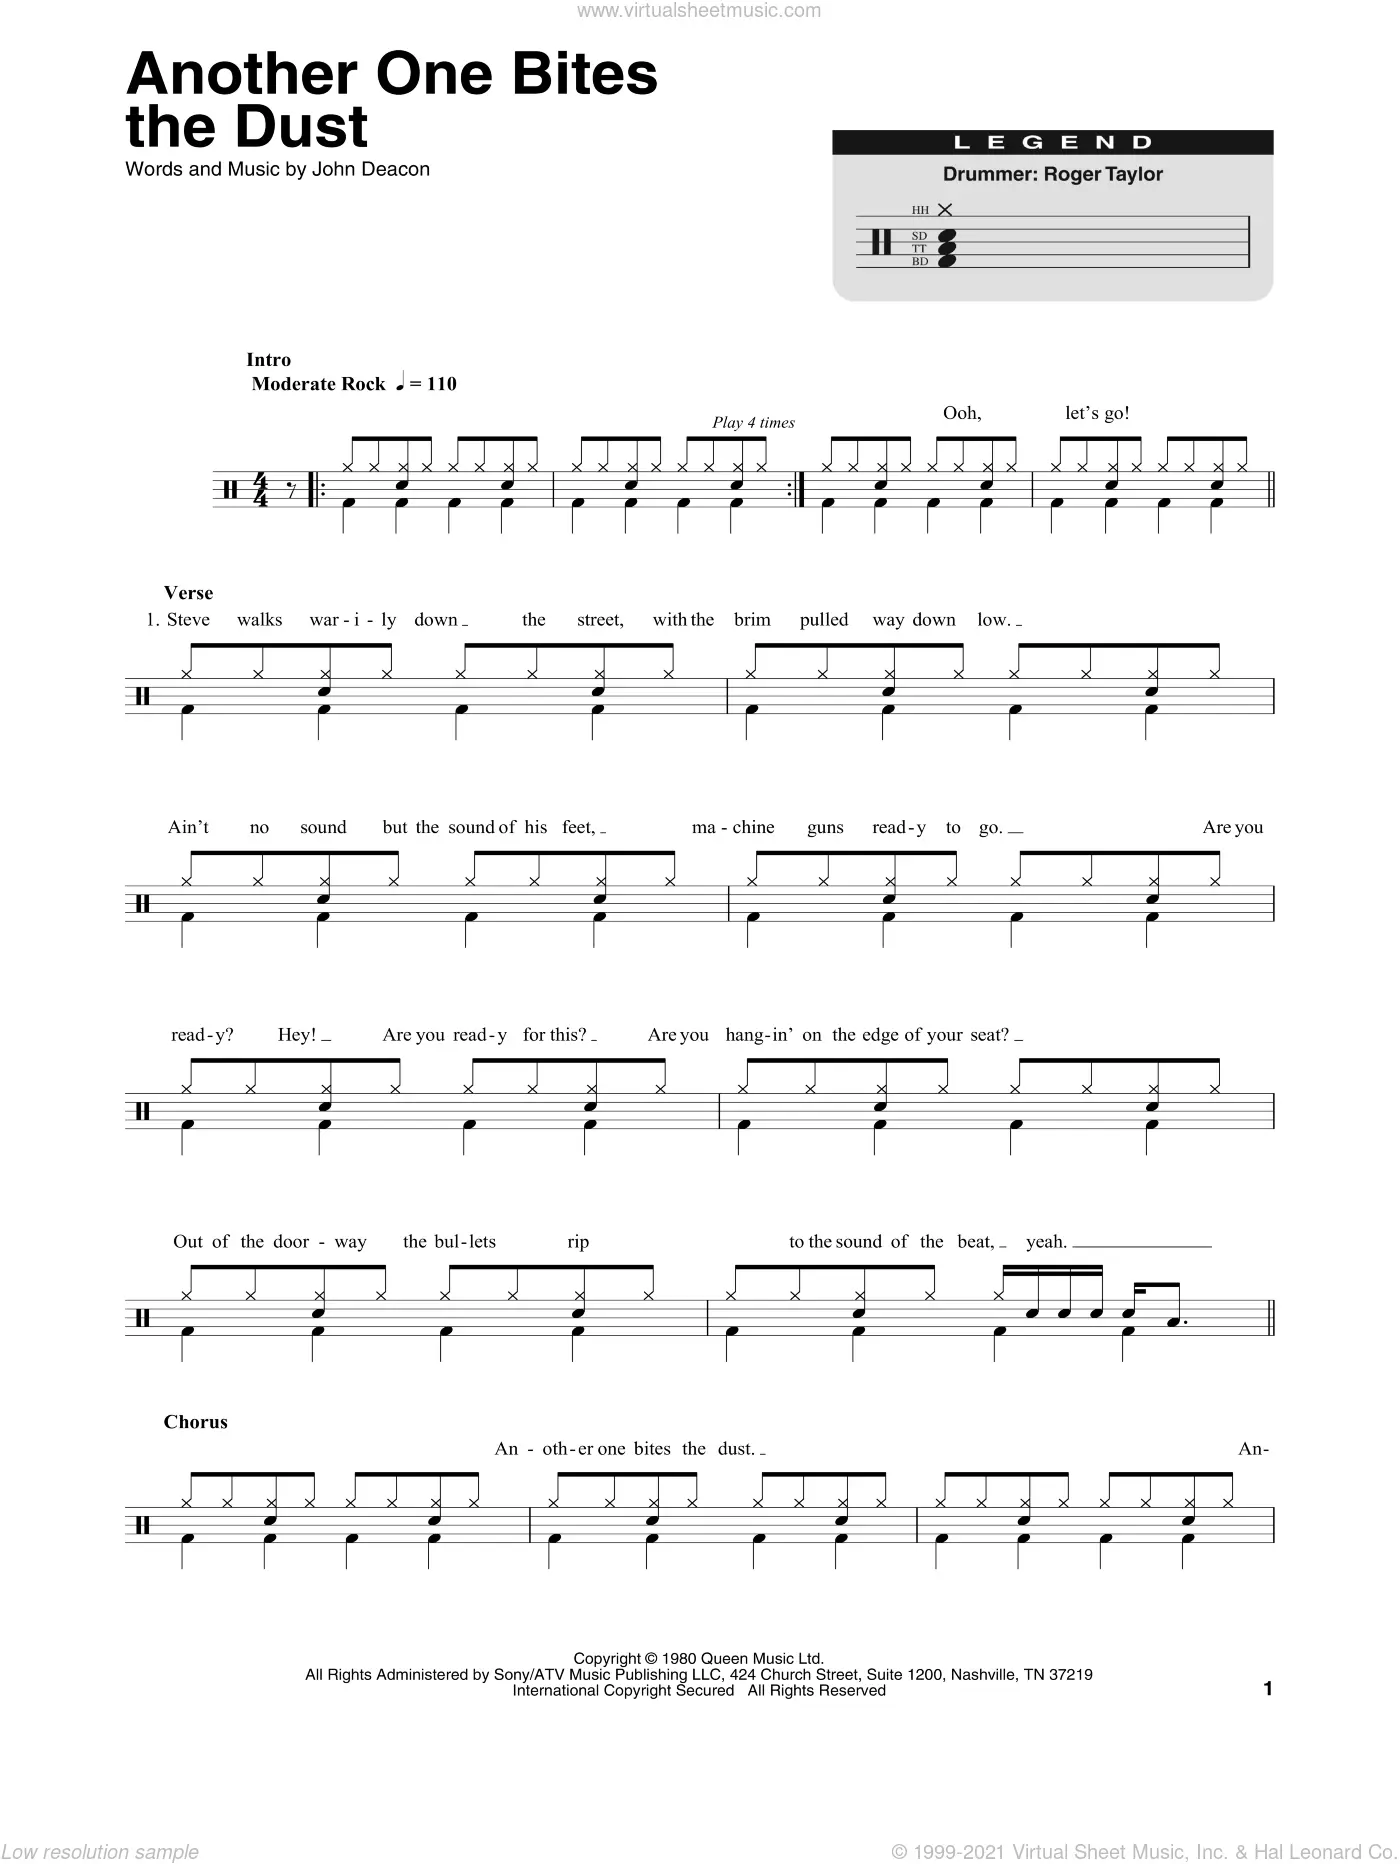 Another One Bites The Dust by Queen - Clarinet Solo - Digital Sheet Music